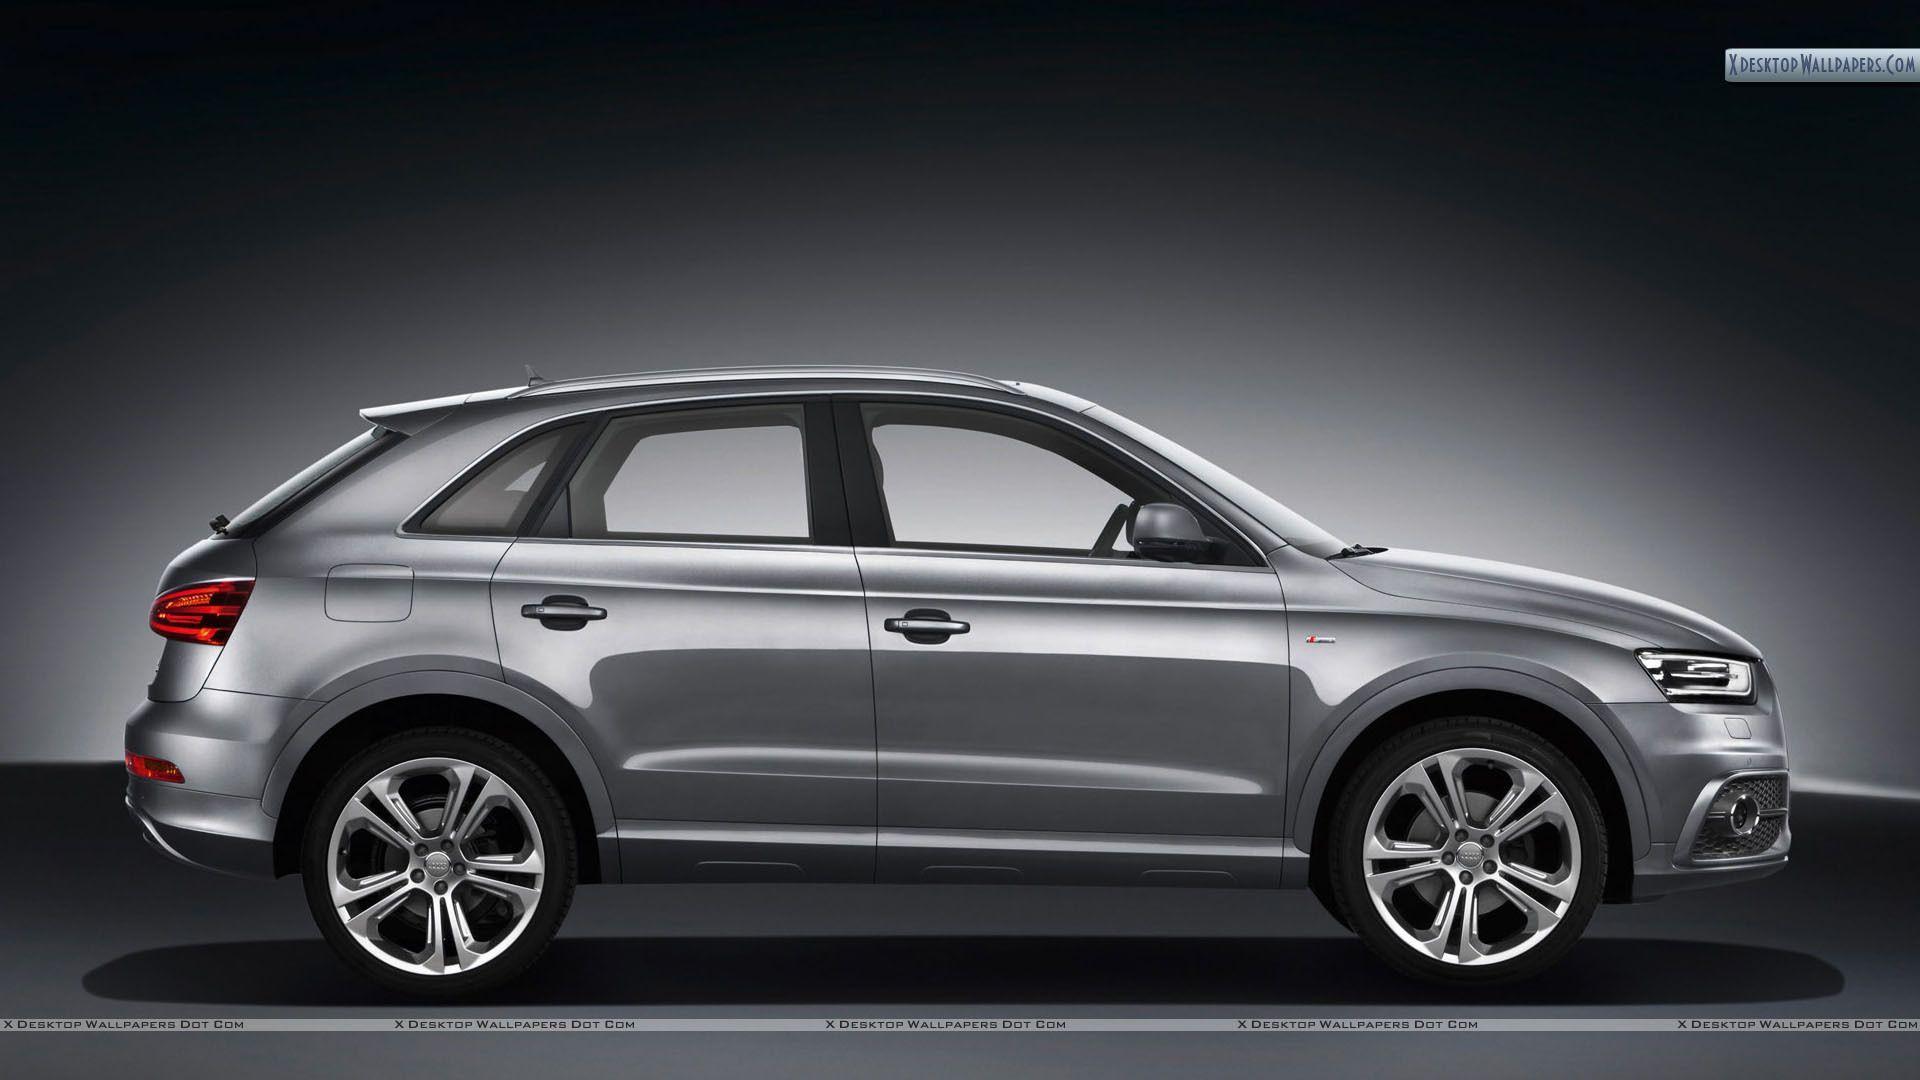 New car Audi q3 wallpaper and image, picture, photo